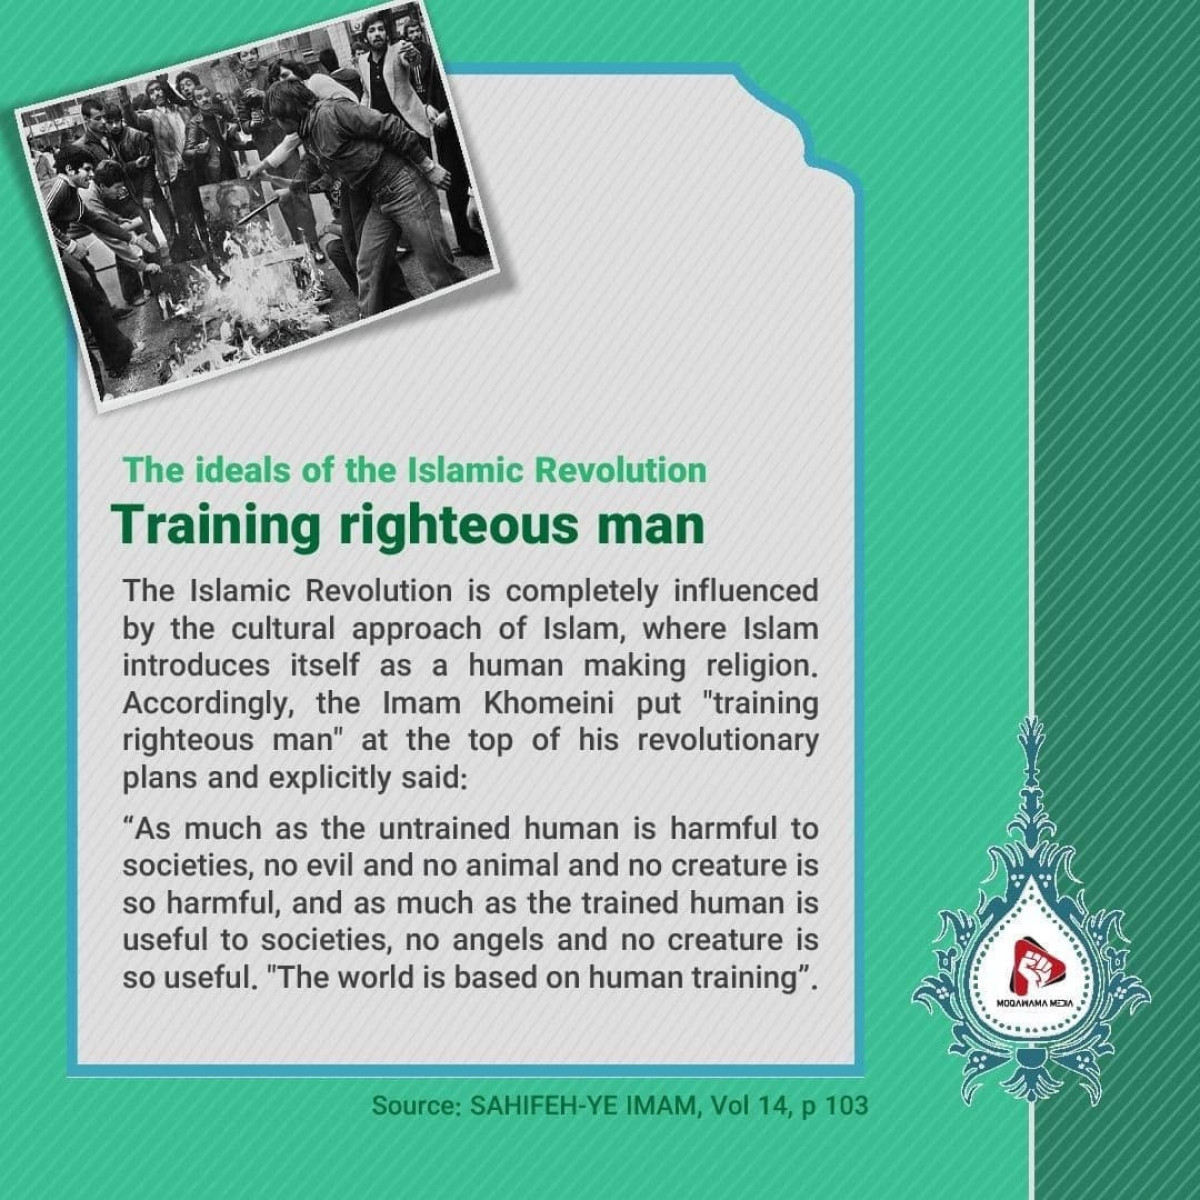 The ideals of the Islamic Revolution: Training righteous man